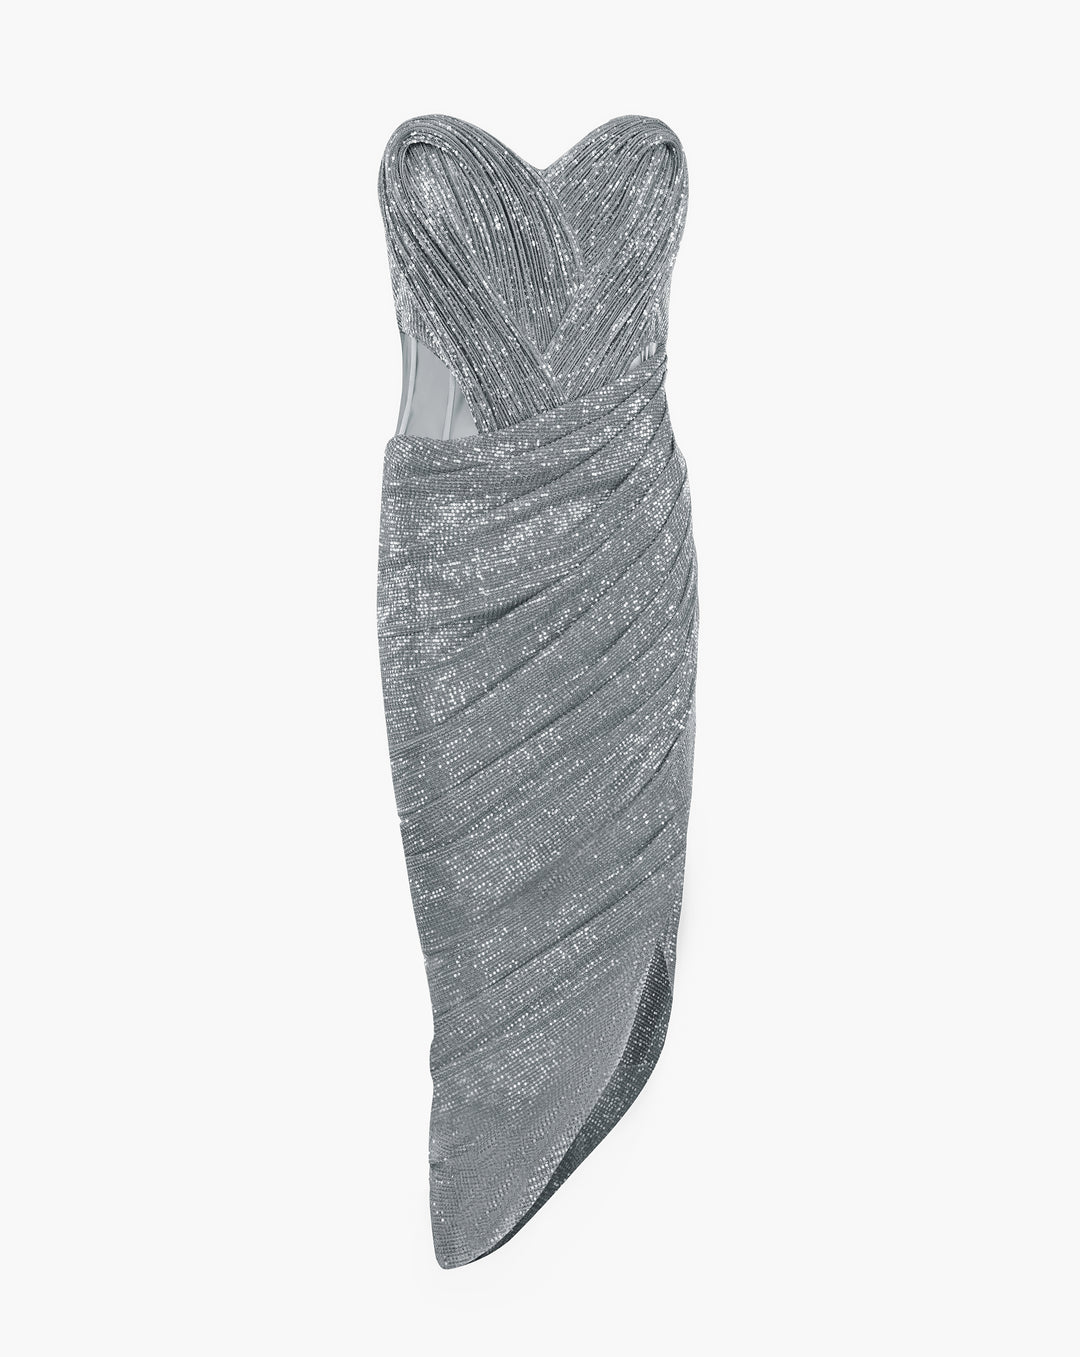 The Corseted Sculpted Dress